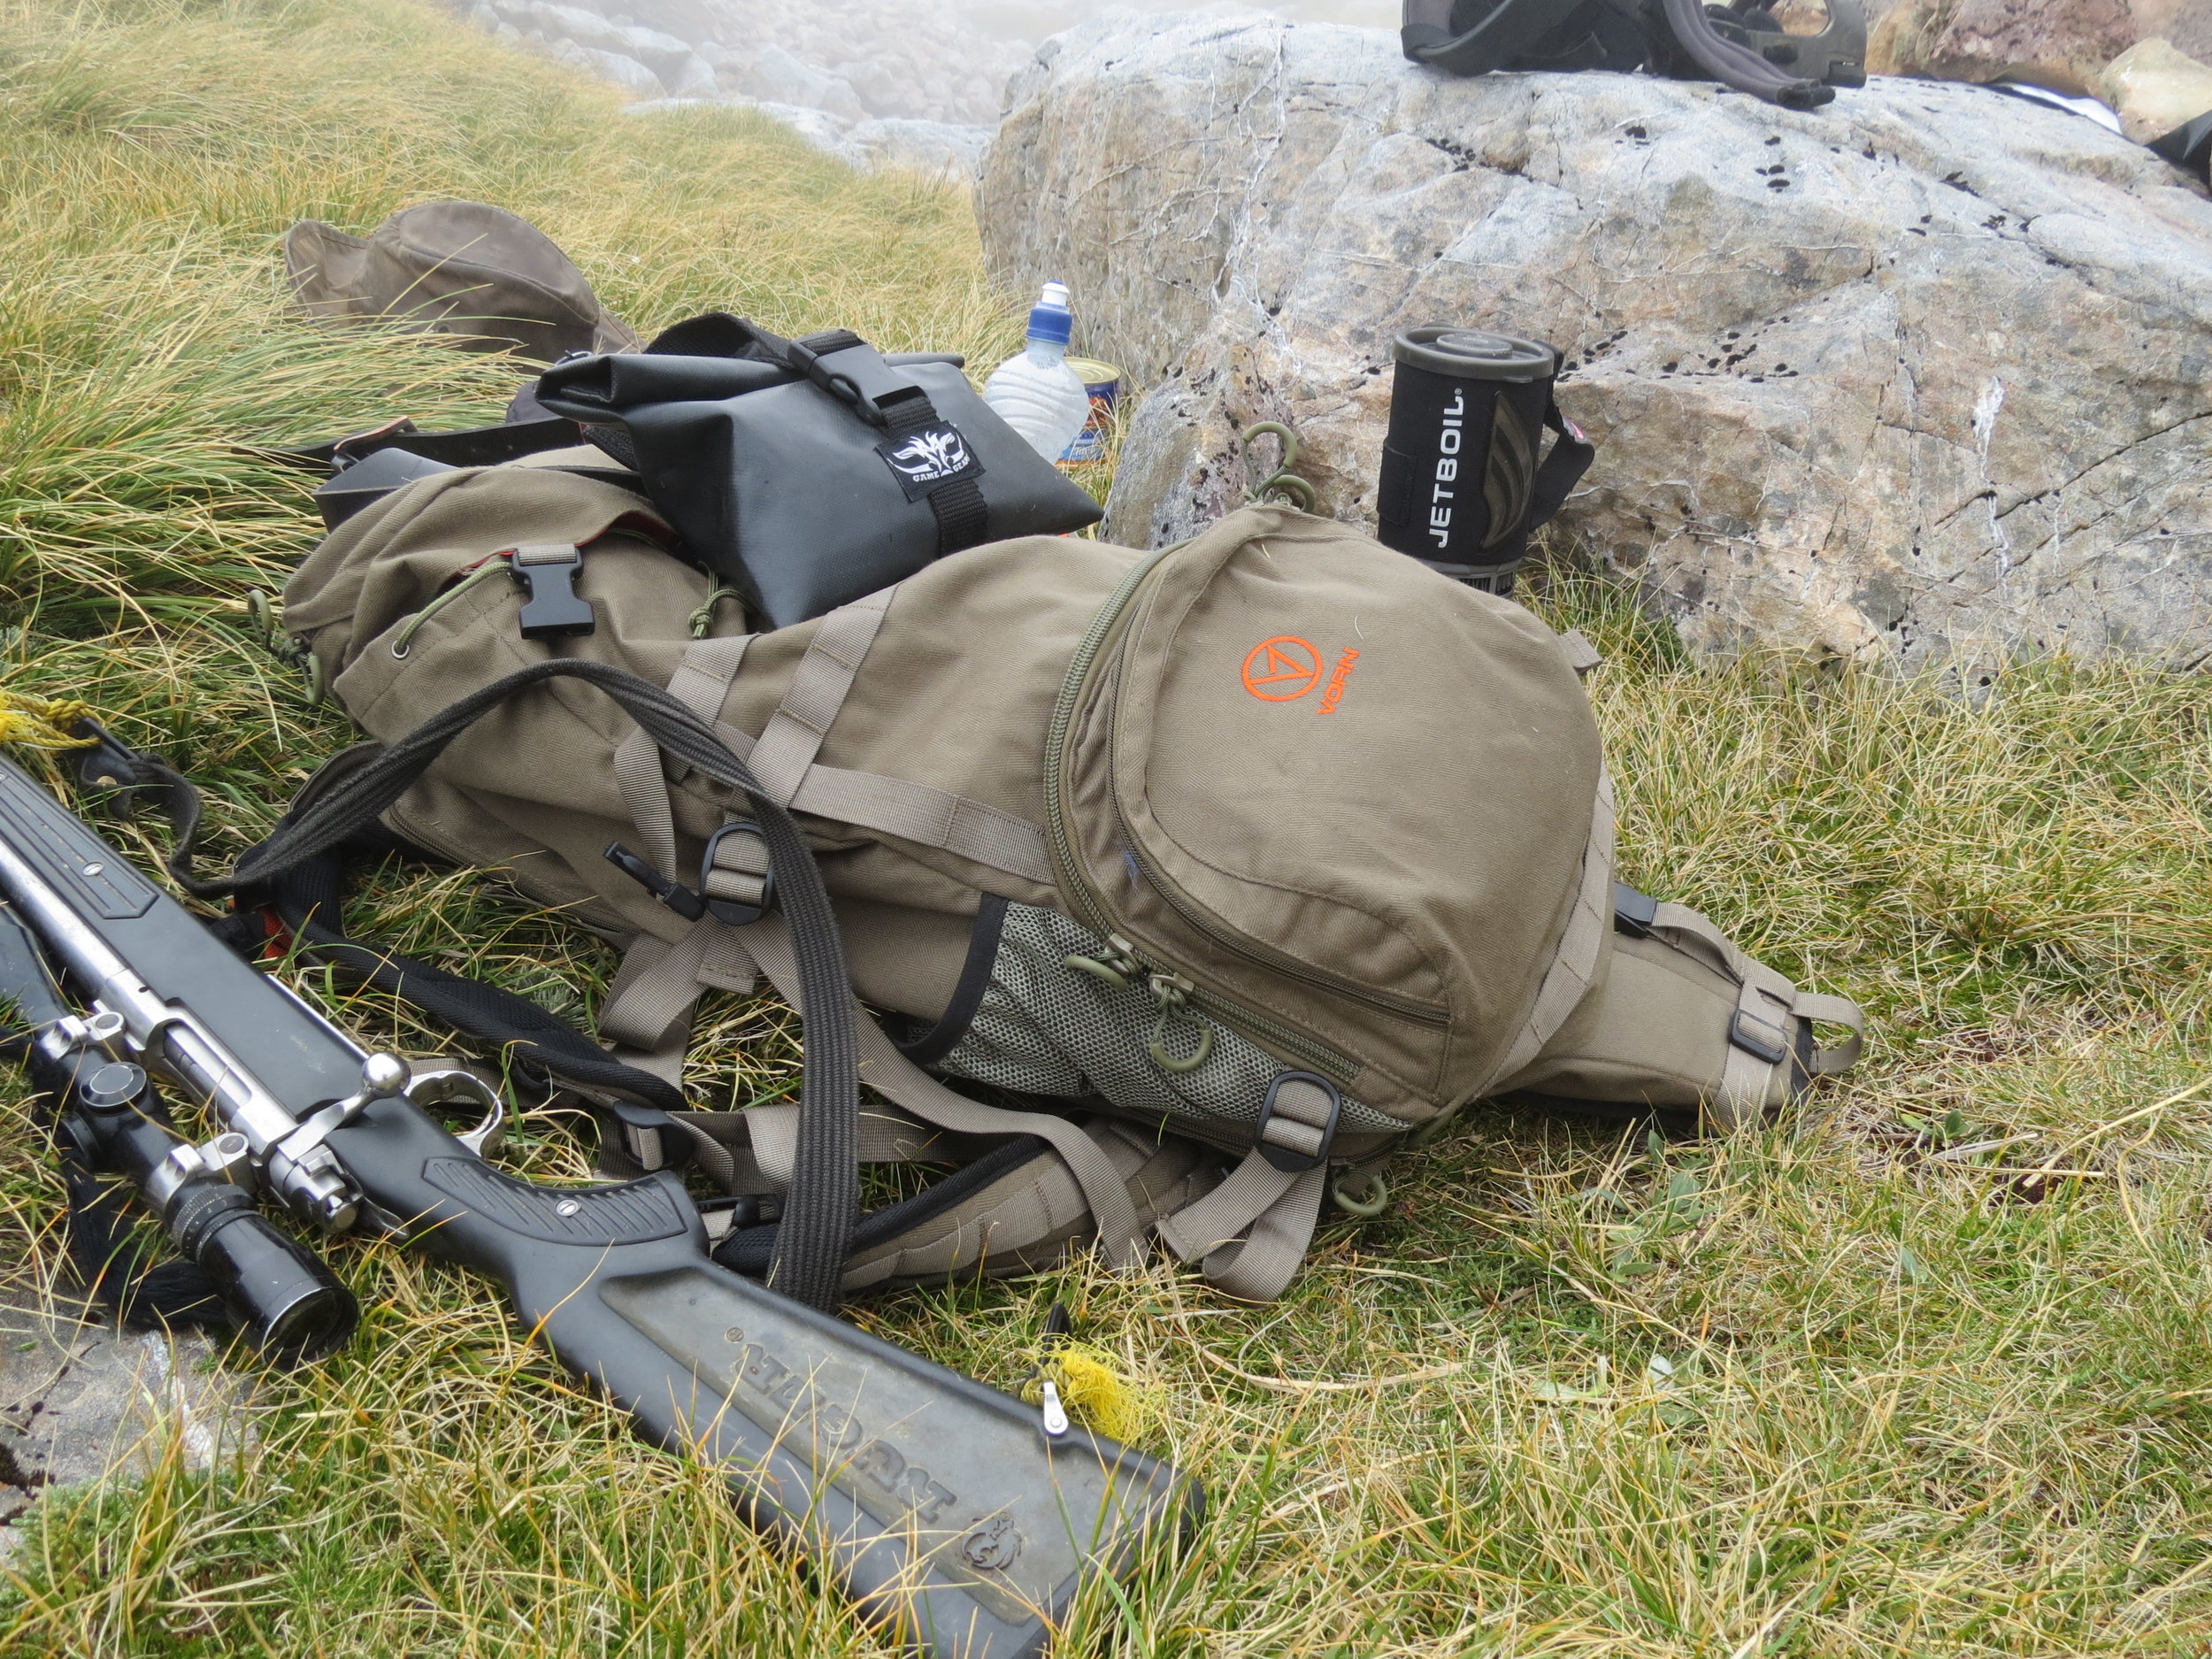  A pack with built in rifle scabbard makes life easier, plus a weather proof camera bag on your waist belt for quick access to your photo opportunities.  